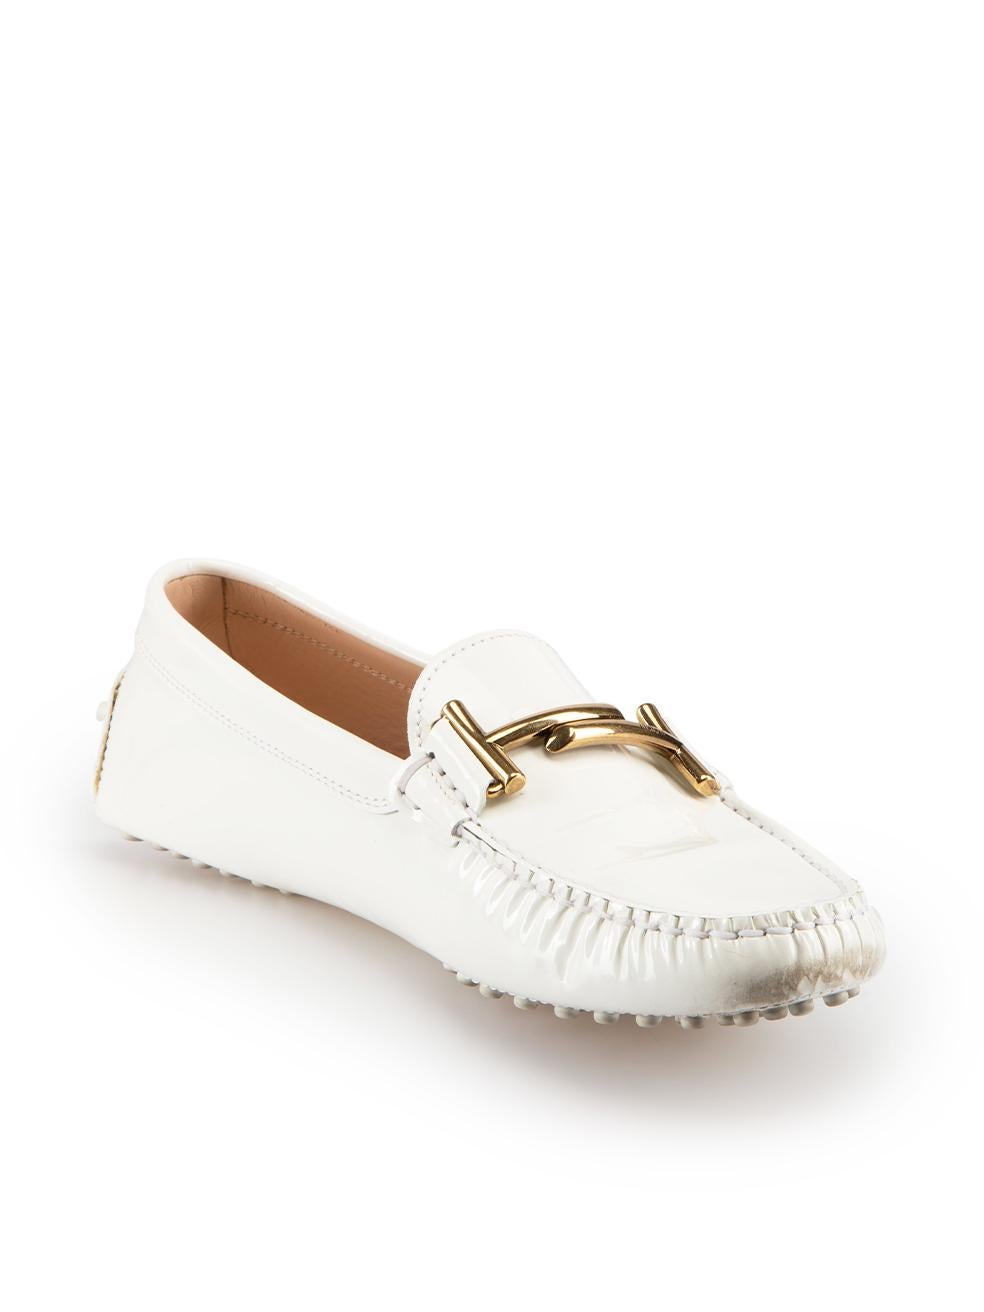 CONDITION is Very good. Minimal wear to shoes is evident. Minimal wear to the left-side of right shoe with small mark to the leather on this used Tod's designer resale item. These shoes come with original box.

Details
White
Patent